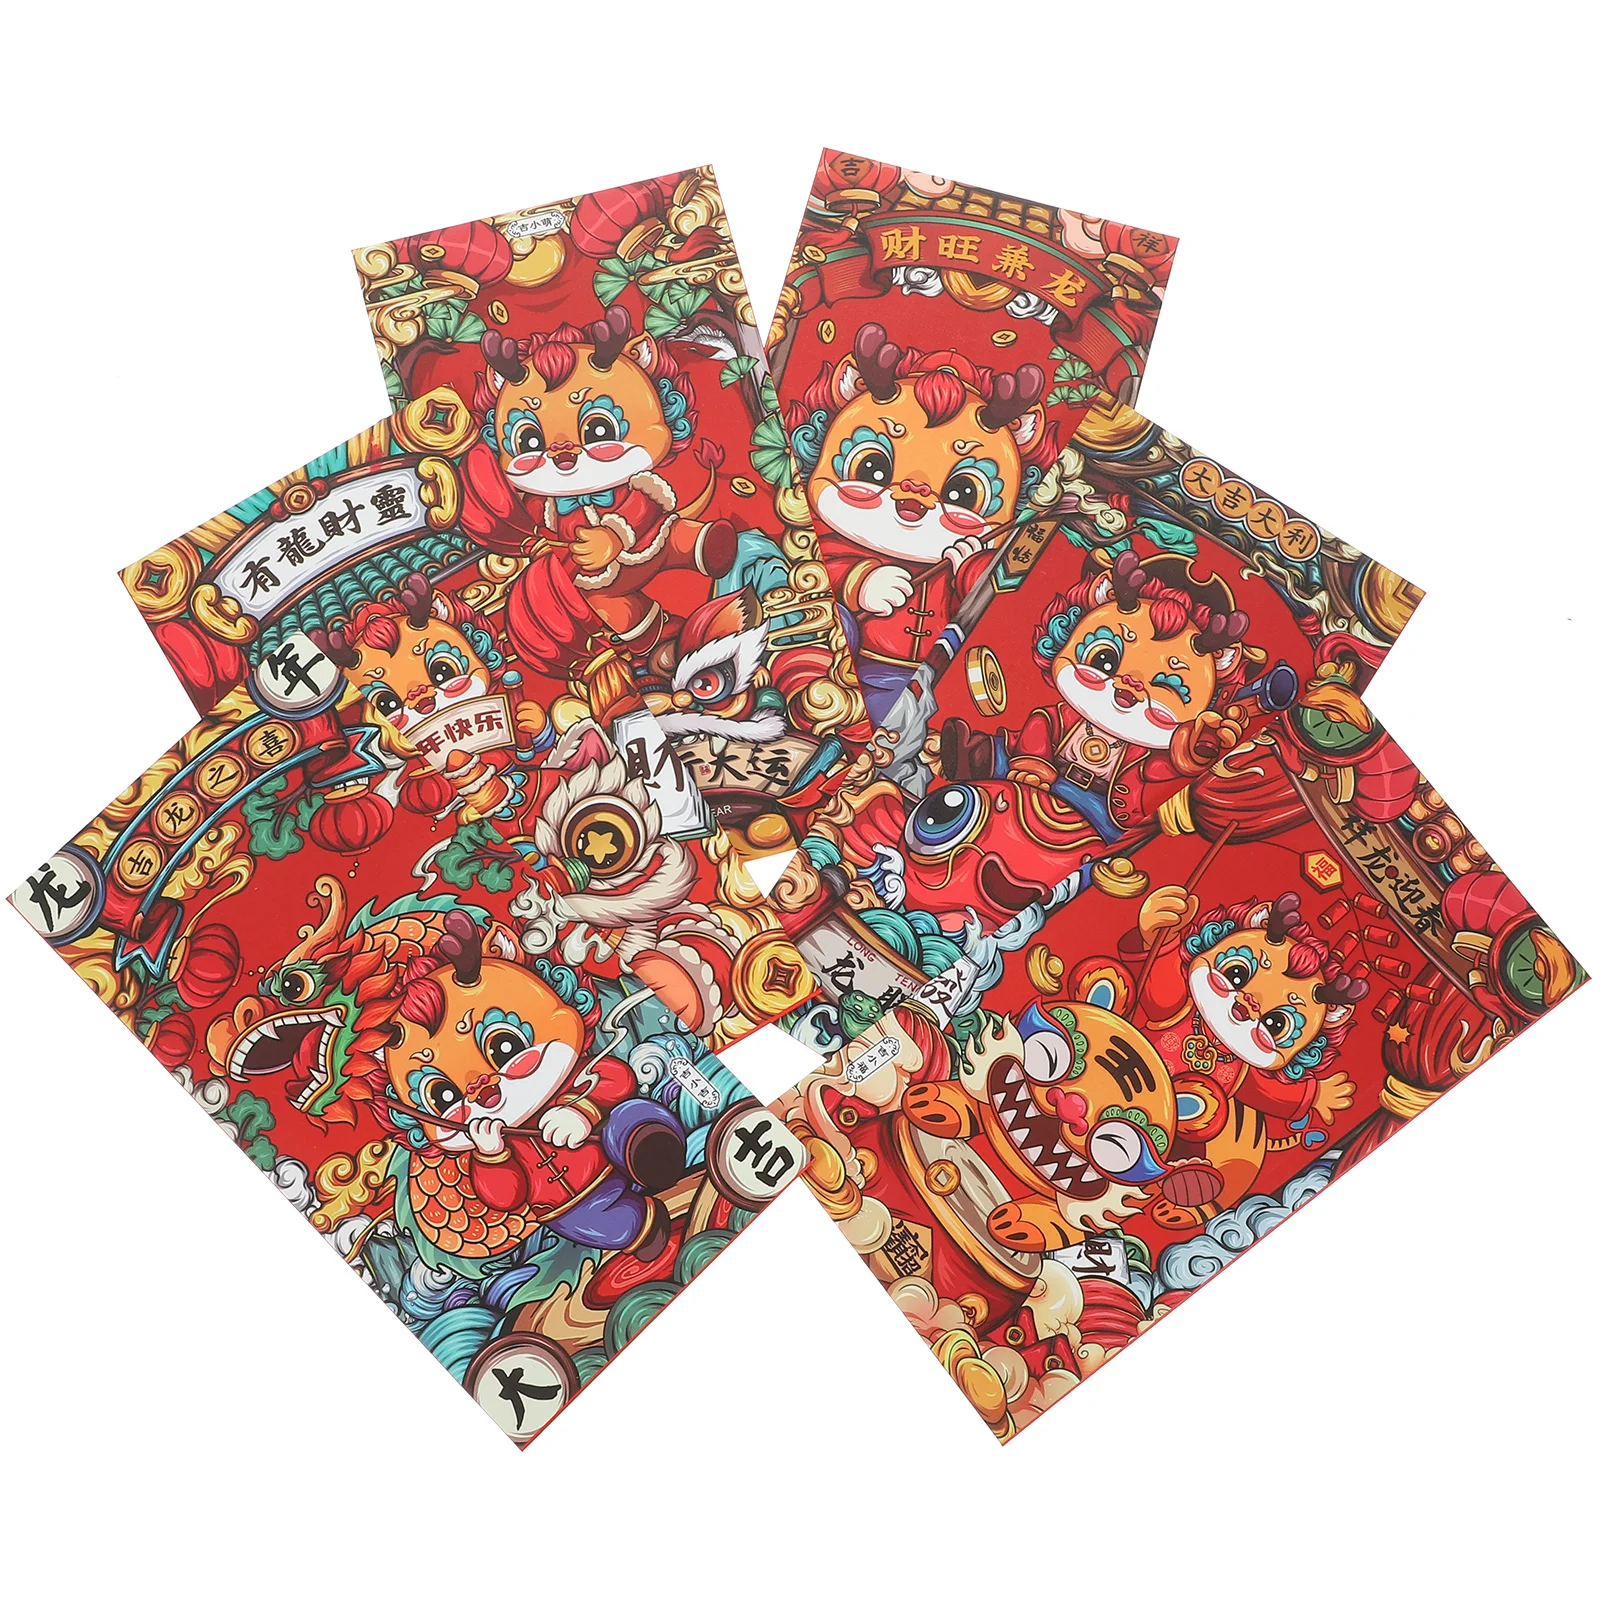 

6 Pcs Red Envelope Bag Celebration New Year Packets Purse Reuseable Luck Money Cardboard Dragon Pattern Good Fortune